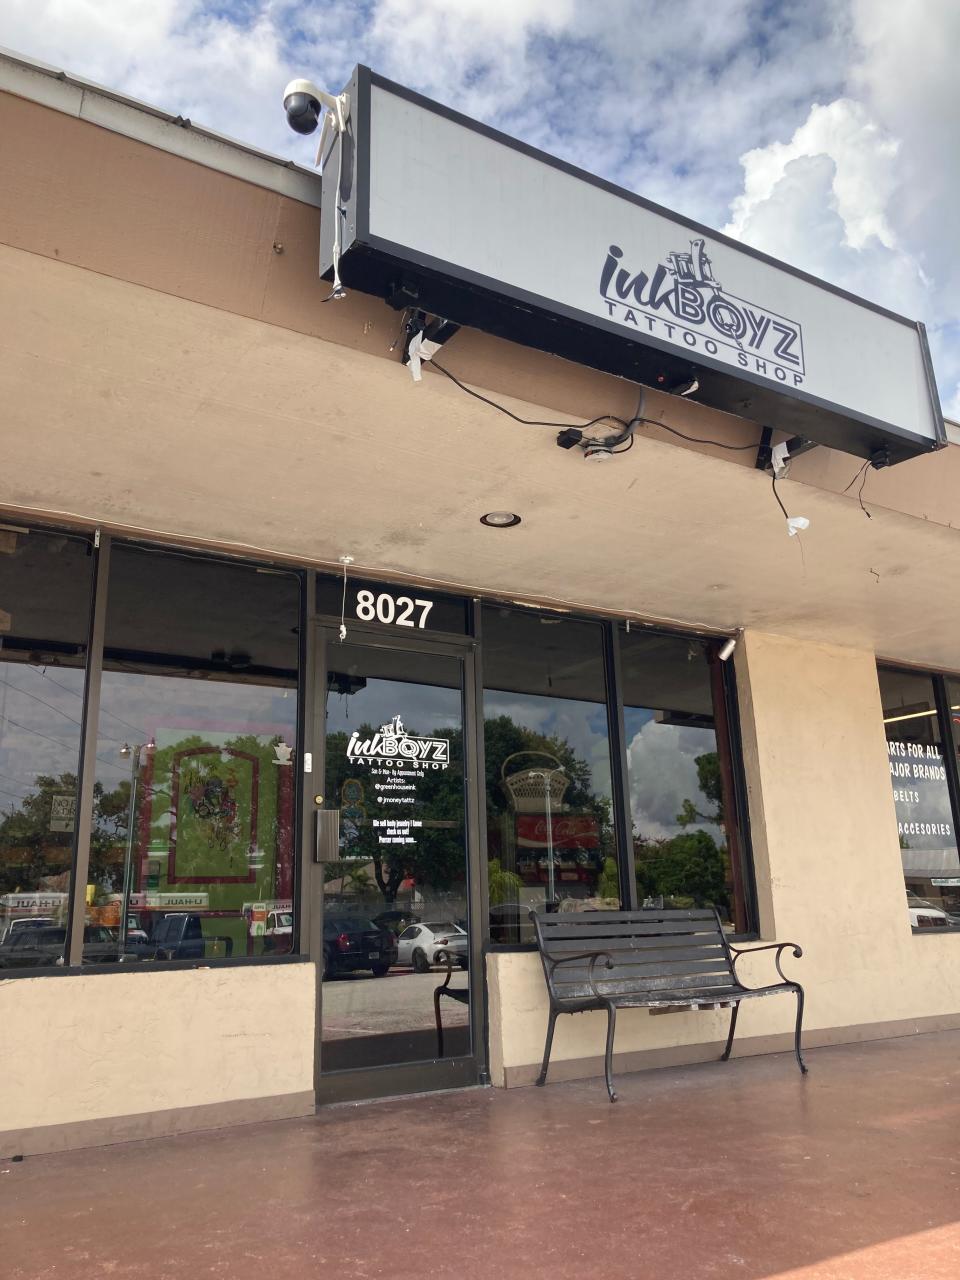 Inkboyz Tattoo Shop on South U.S. 1 in St. Lucie County where Homeland Security Investigations officials on Aug. 11, 2022, reported executing a search warrant